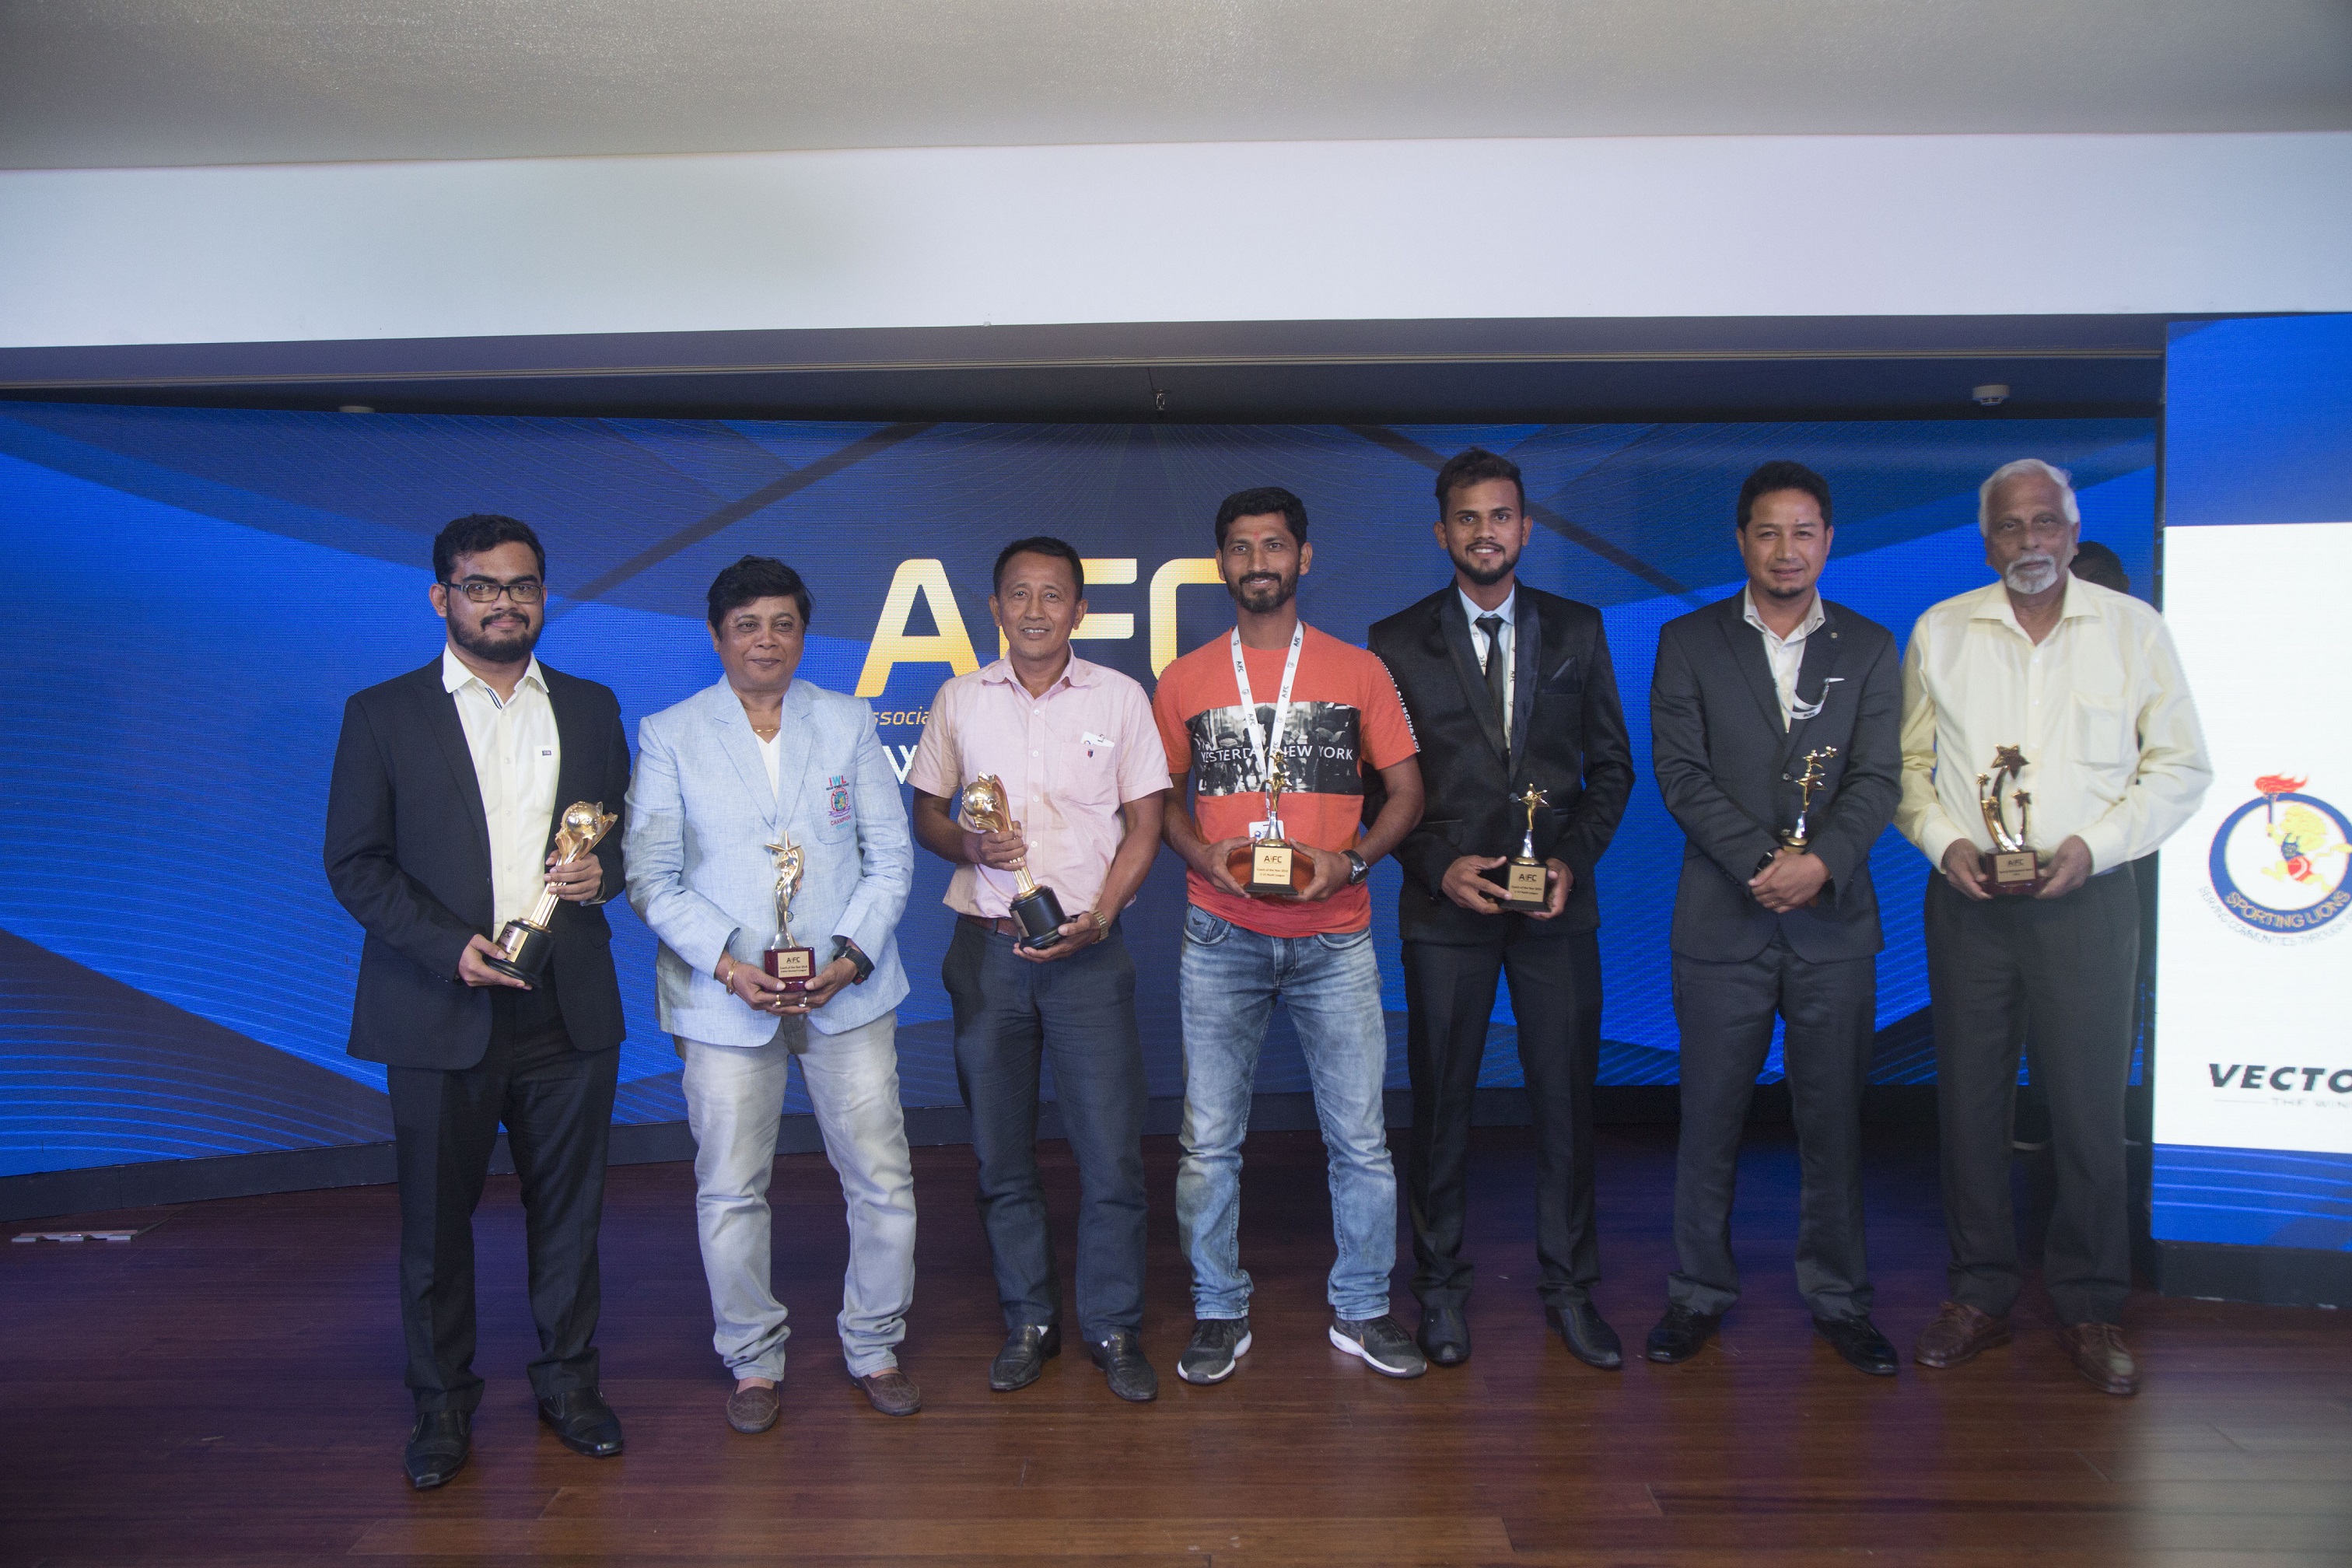 AIFC hold their first ever Awards Night